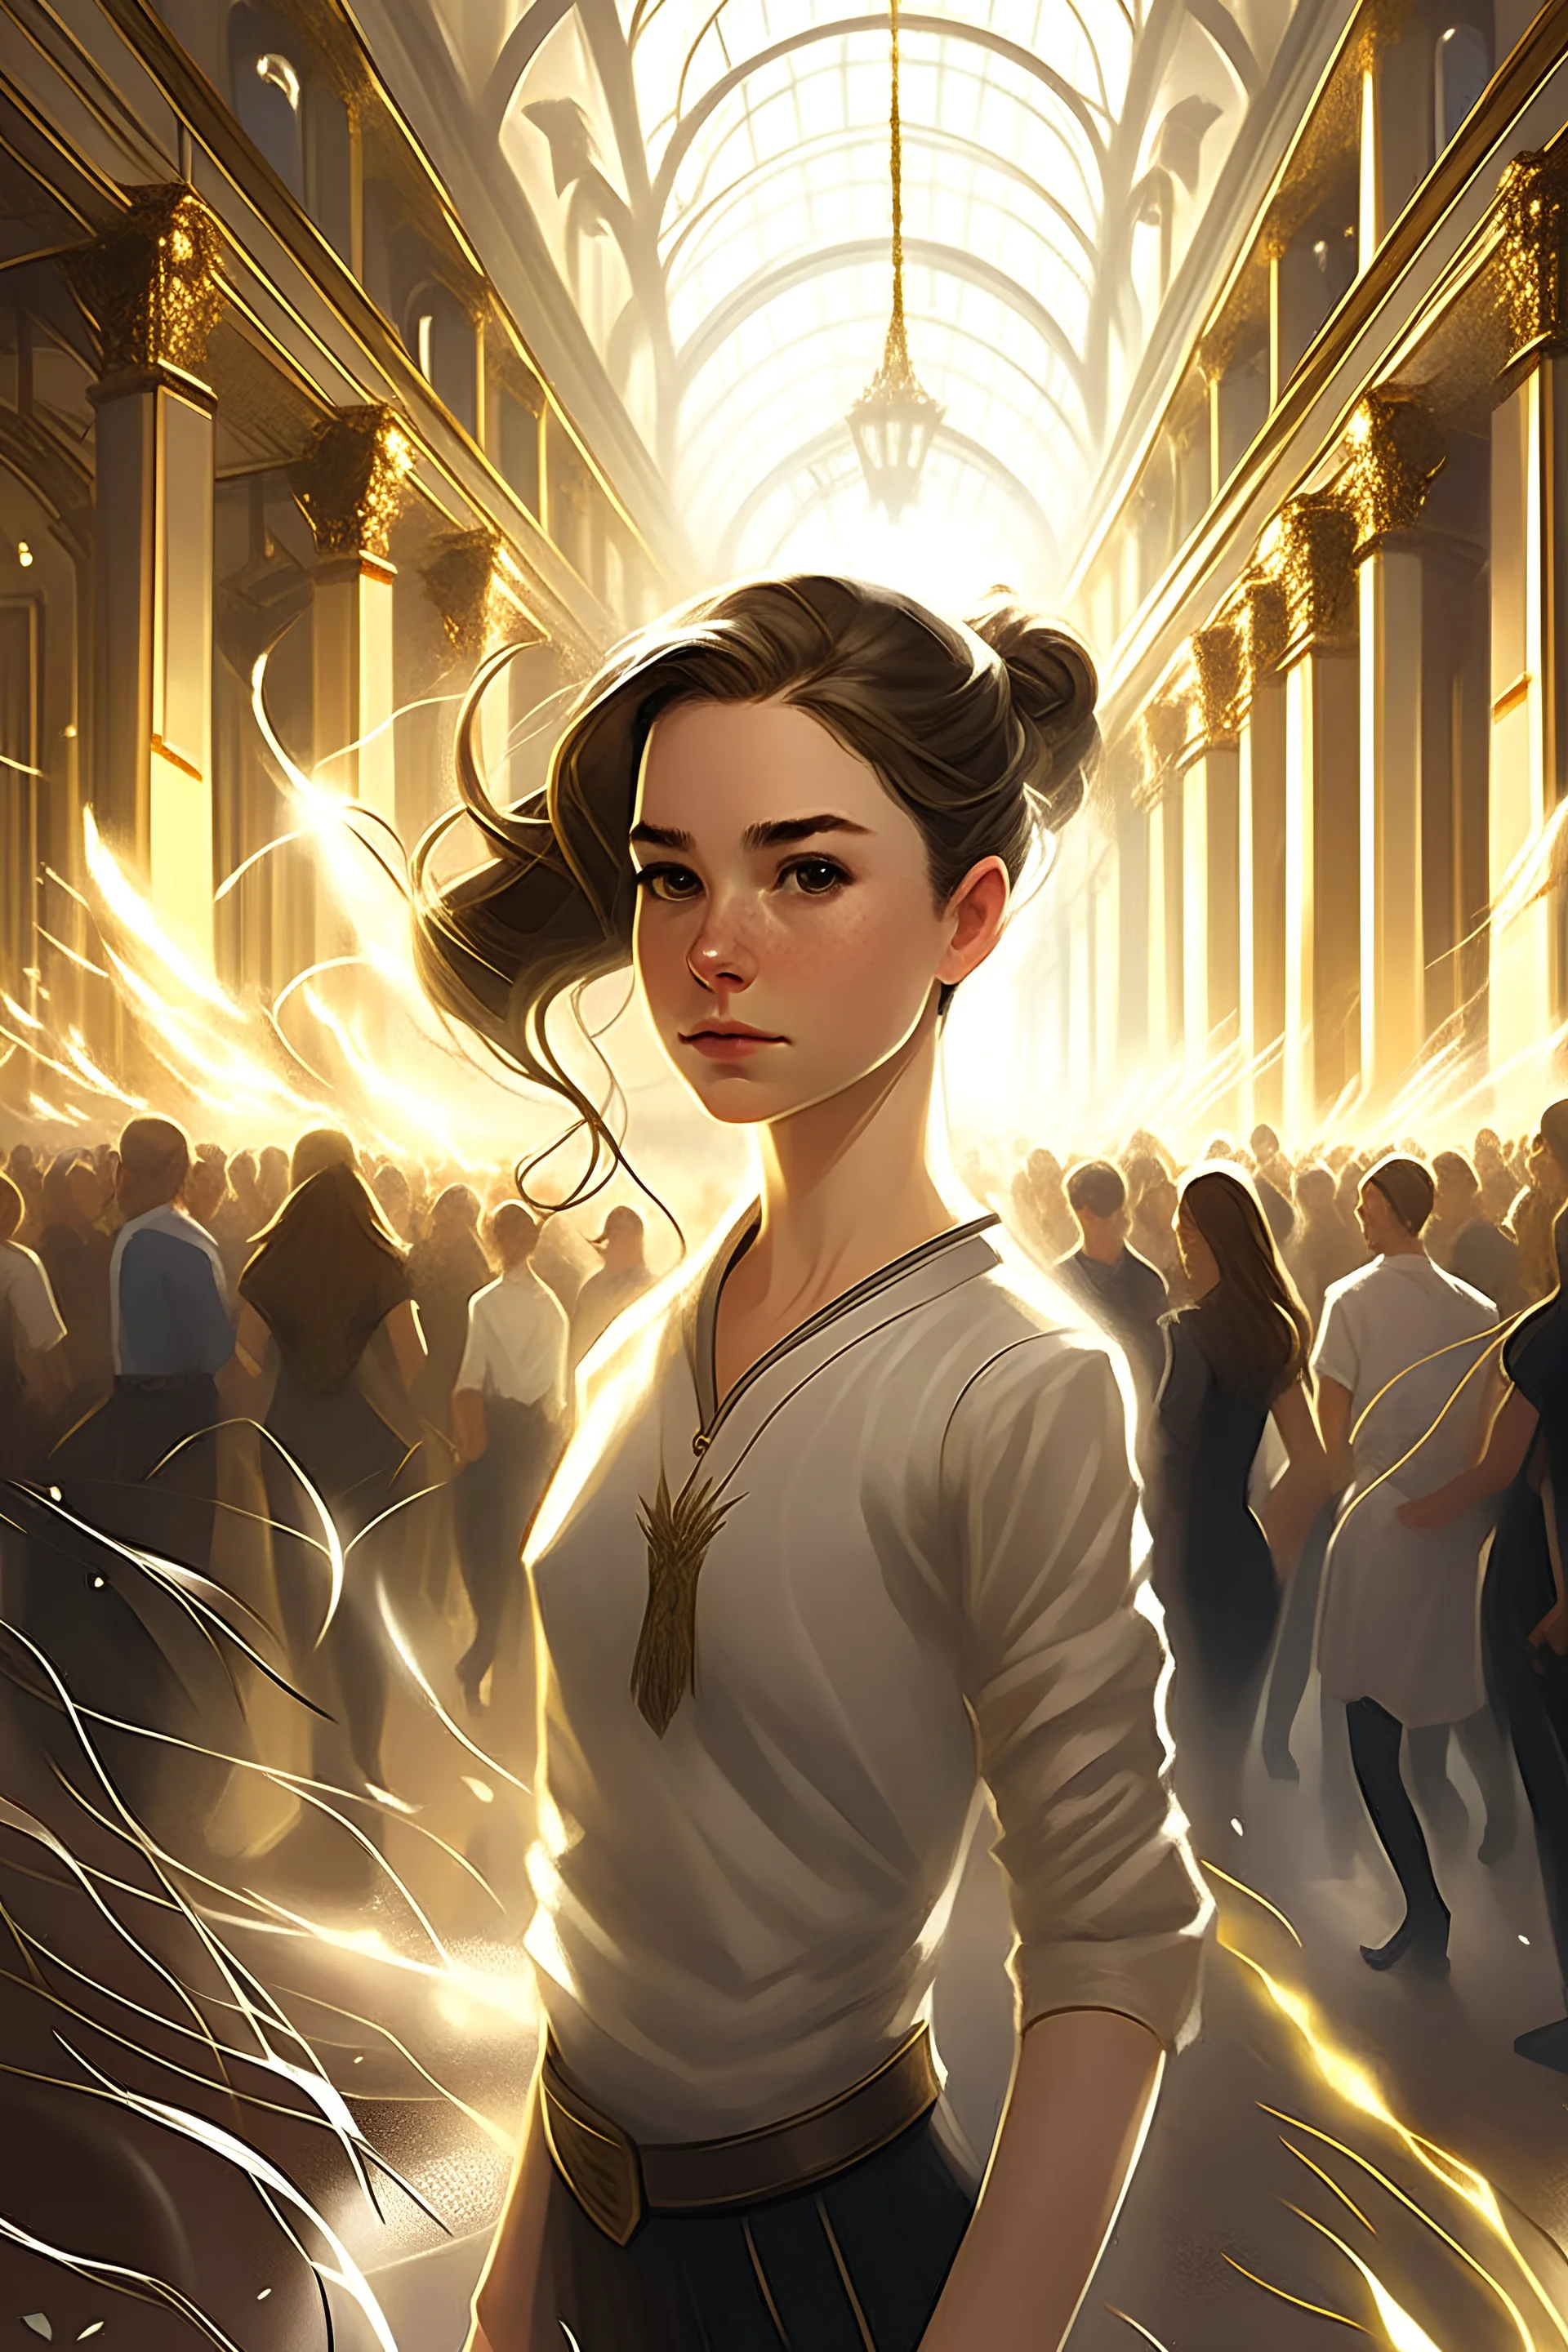 A 17-year-old girl with brown hair, who was wearing a long-sleeved white shirt and black pants, both decorated with a single sliver stripe down each side, with lightning bolts zipping everywhere in a palace ball filled with people looking at her with surprised expression.